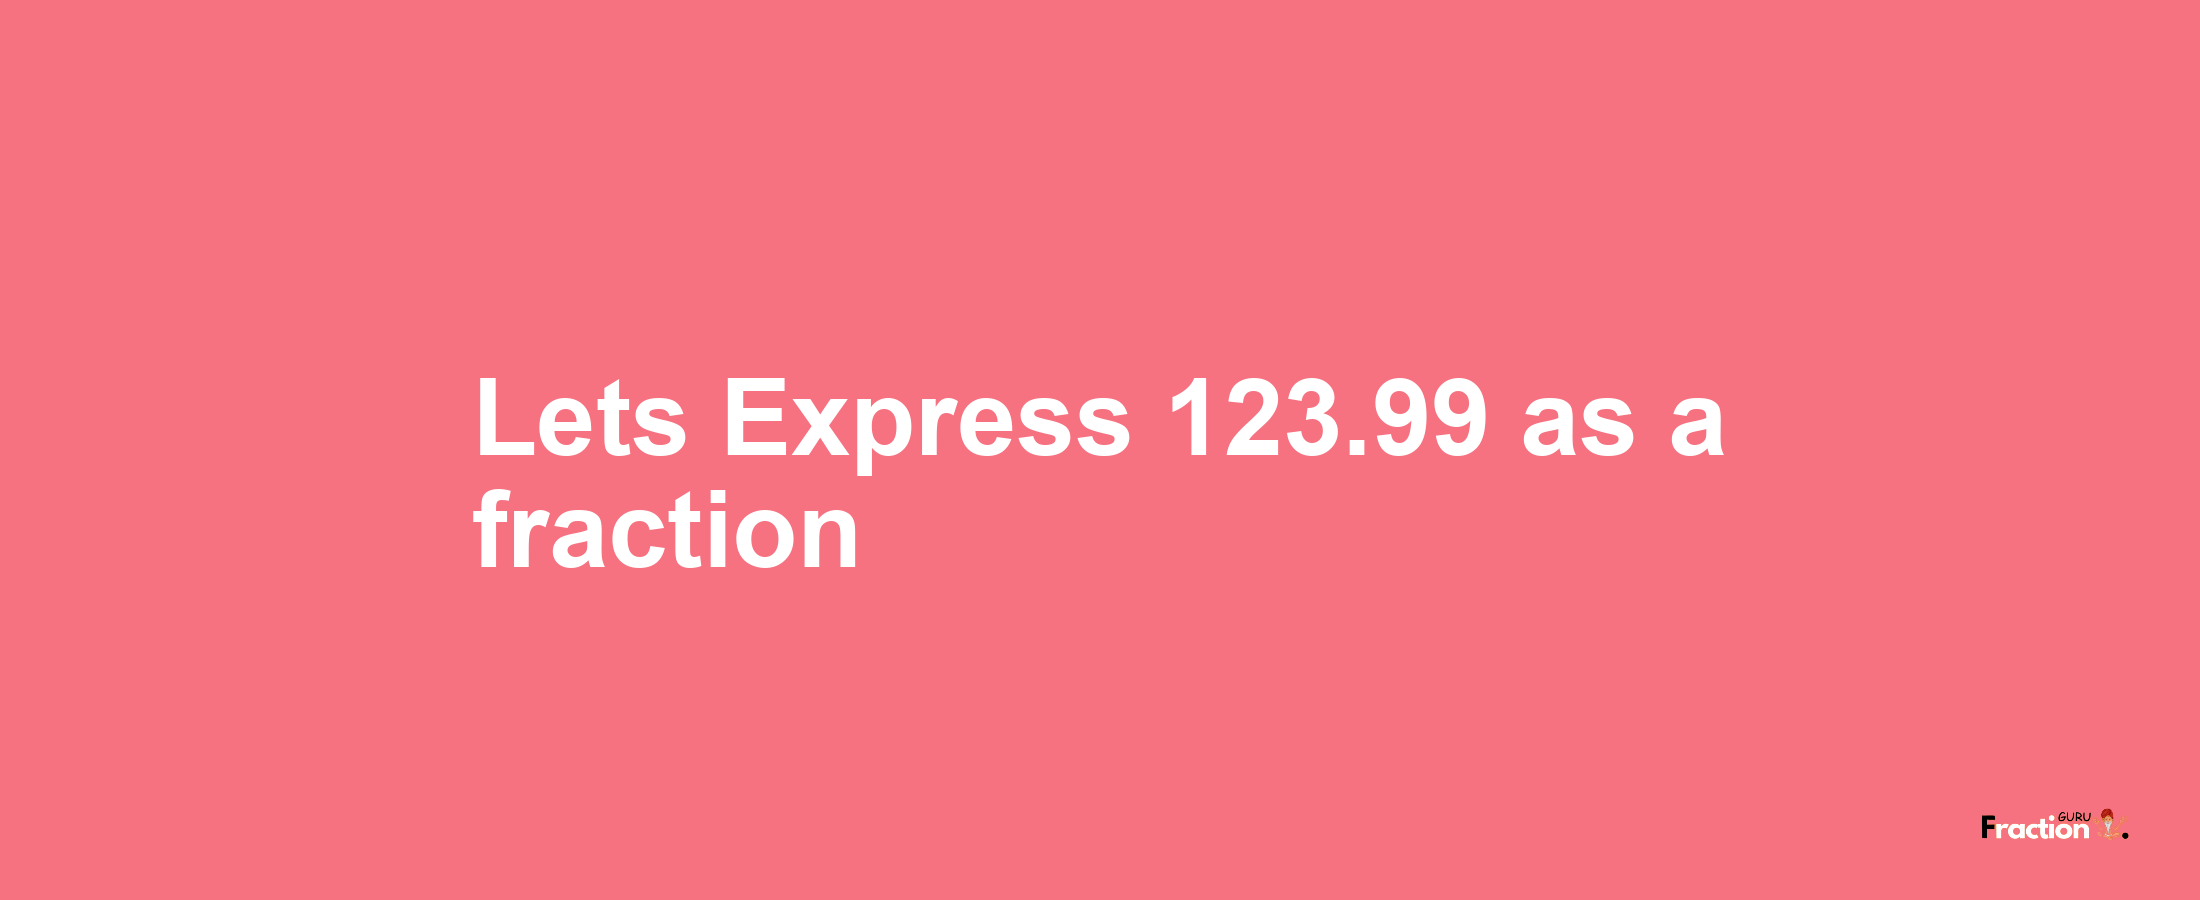 Lets Express 123.99 as afraction